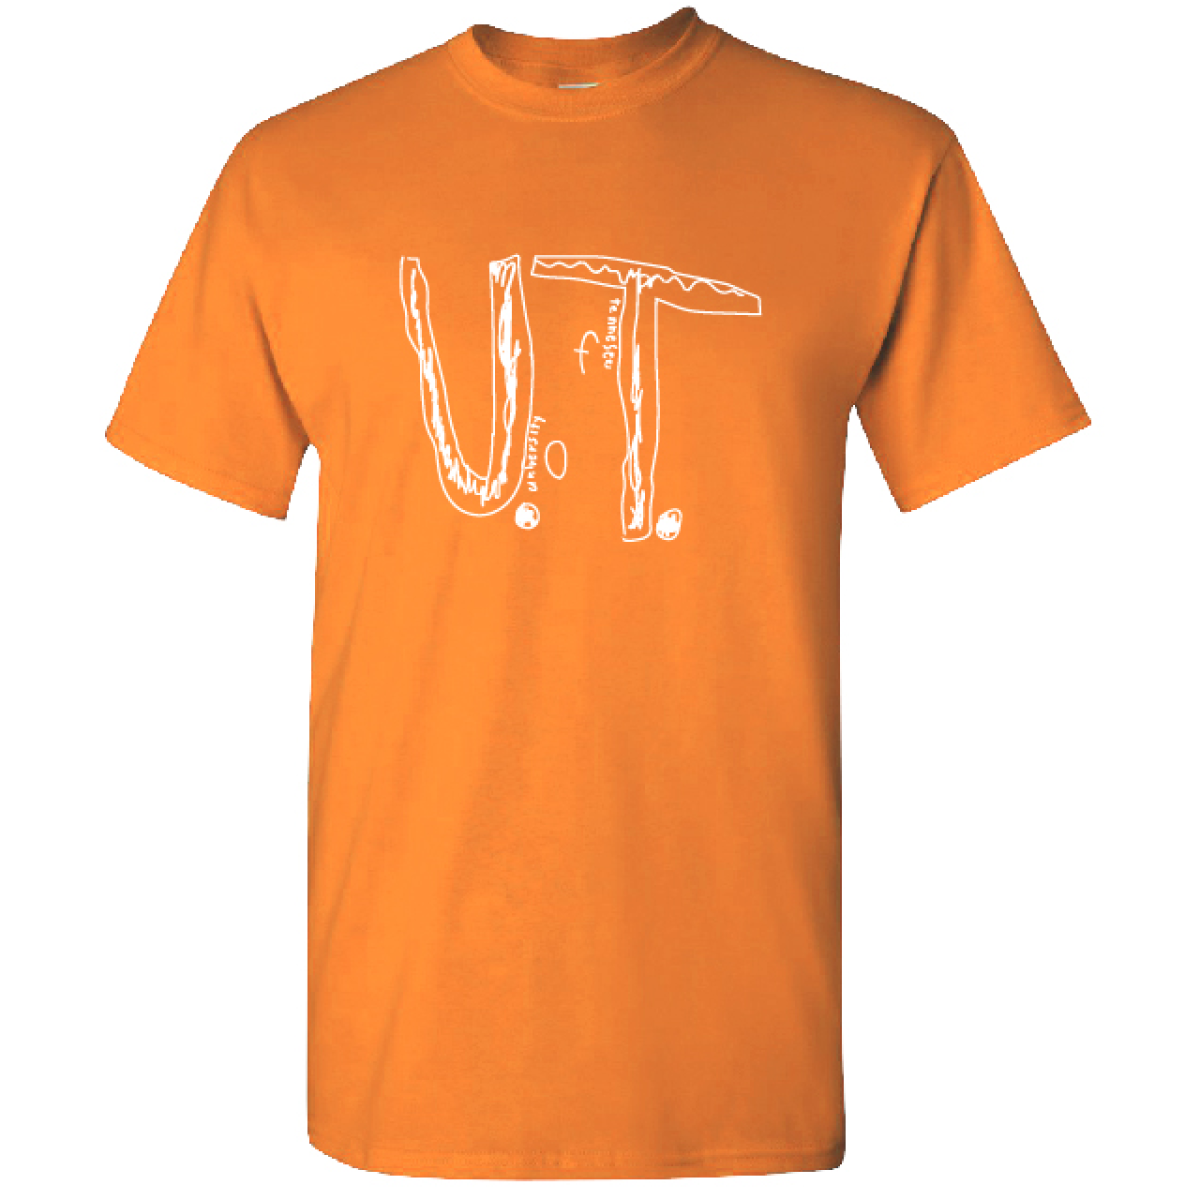 Tennessee is selling this copy of the boy's hand-made T-shirt.